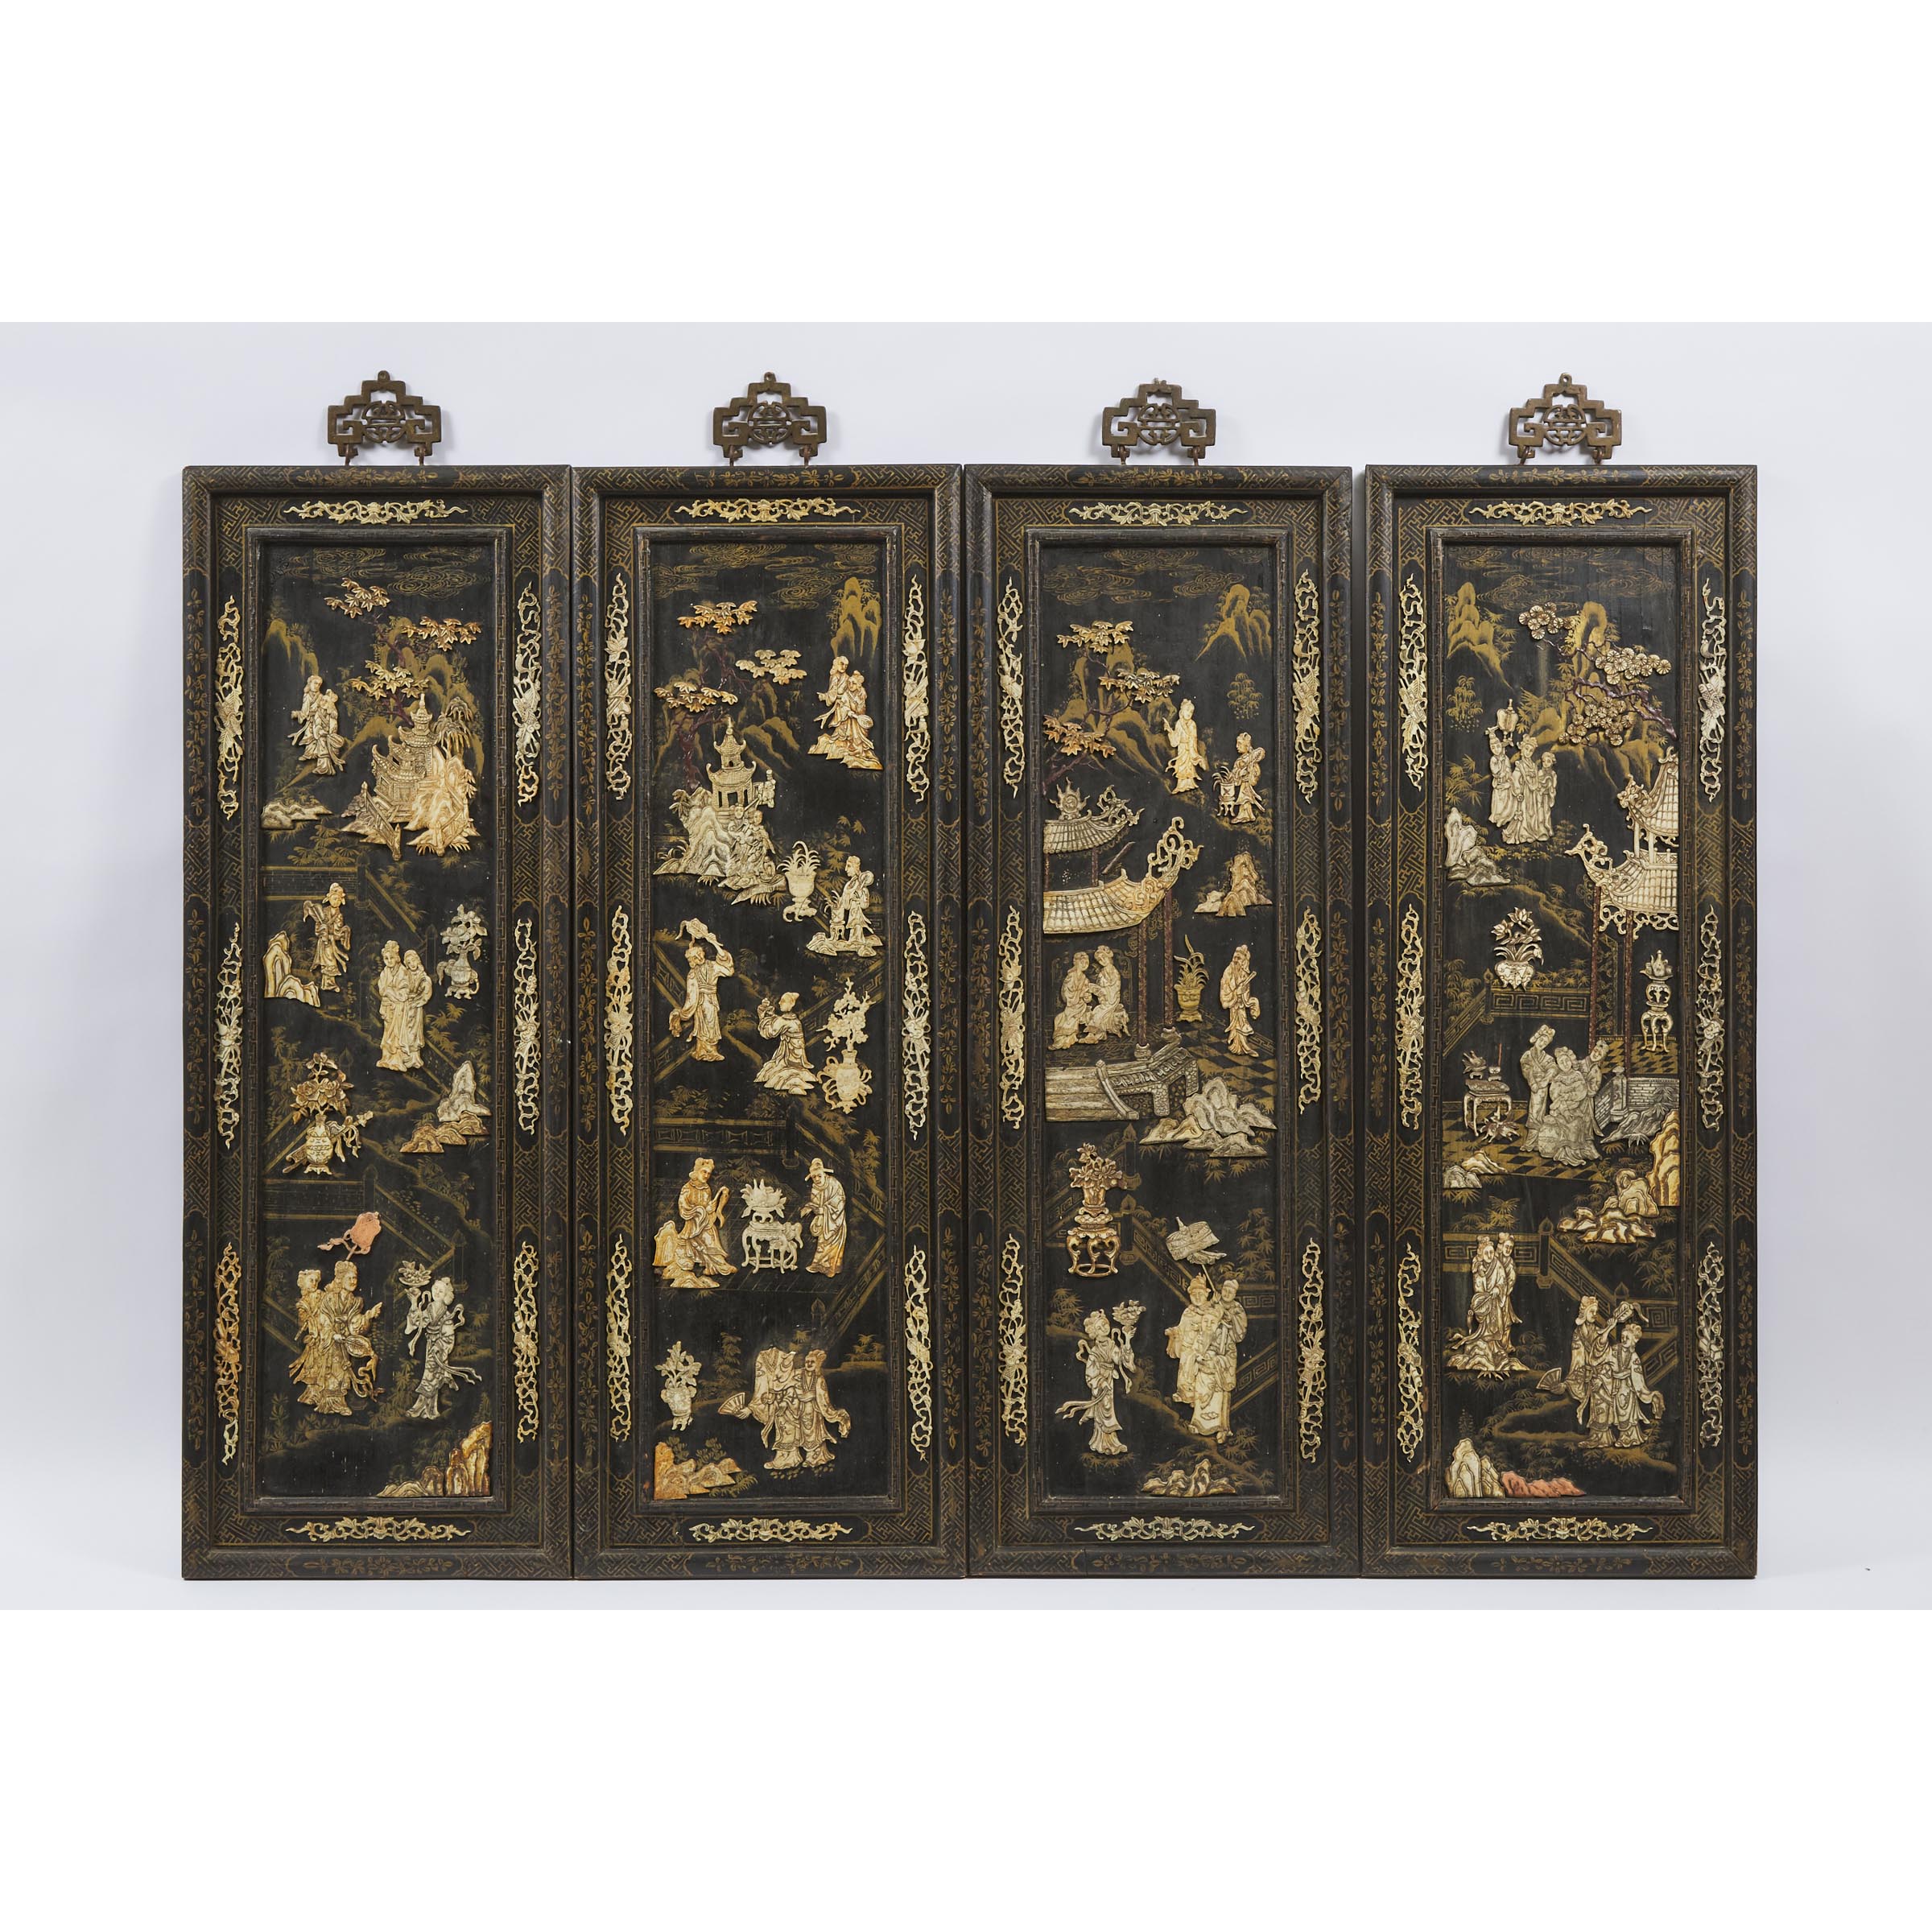 A Set of Four Bone-Inlaid Lacquer Hanging Panels, Late 19th Century